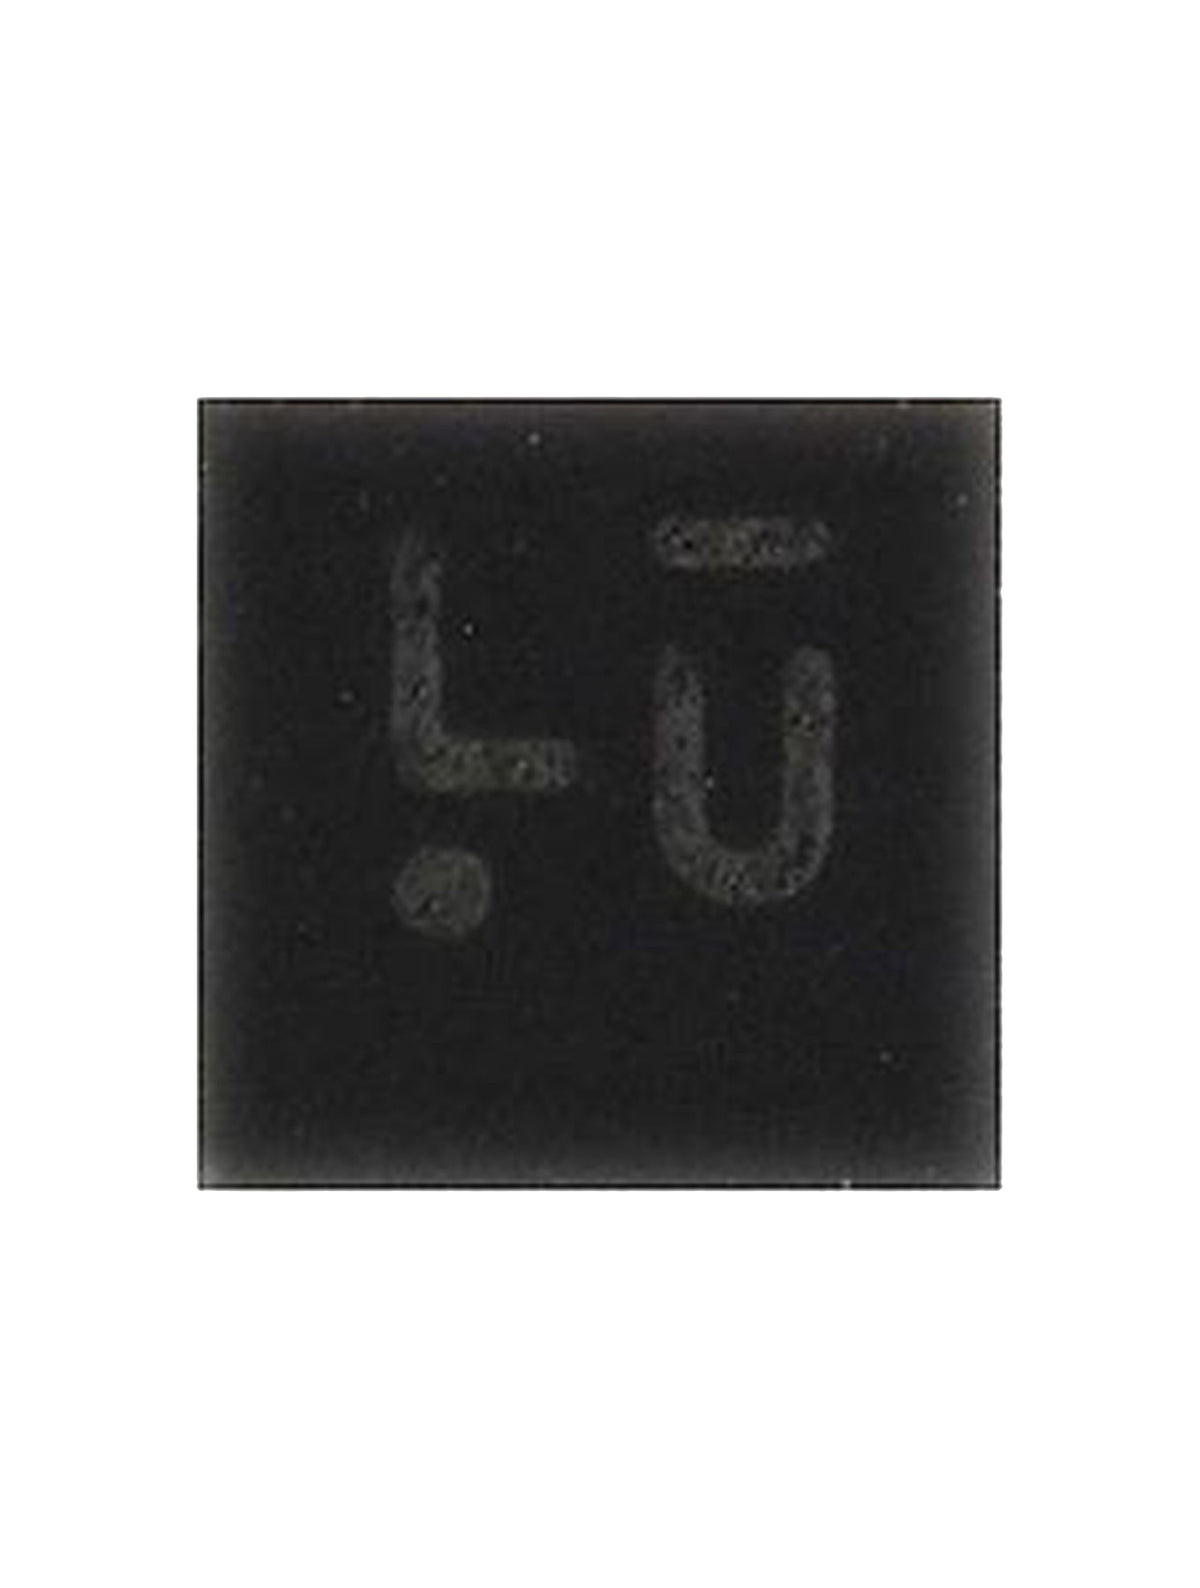 MULTIPLEXER SWITCH IC COMPATIBLE WITH IPHONE 7 / 7 PLUS (SWPMX_RF: 6 PINS)